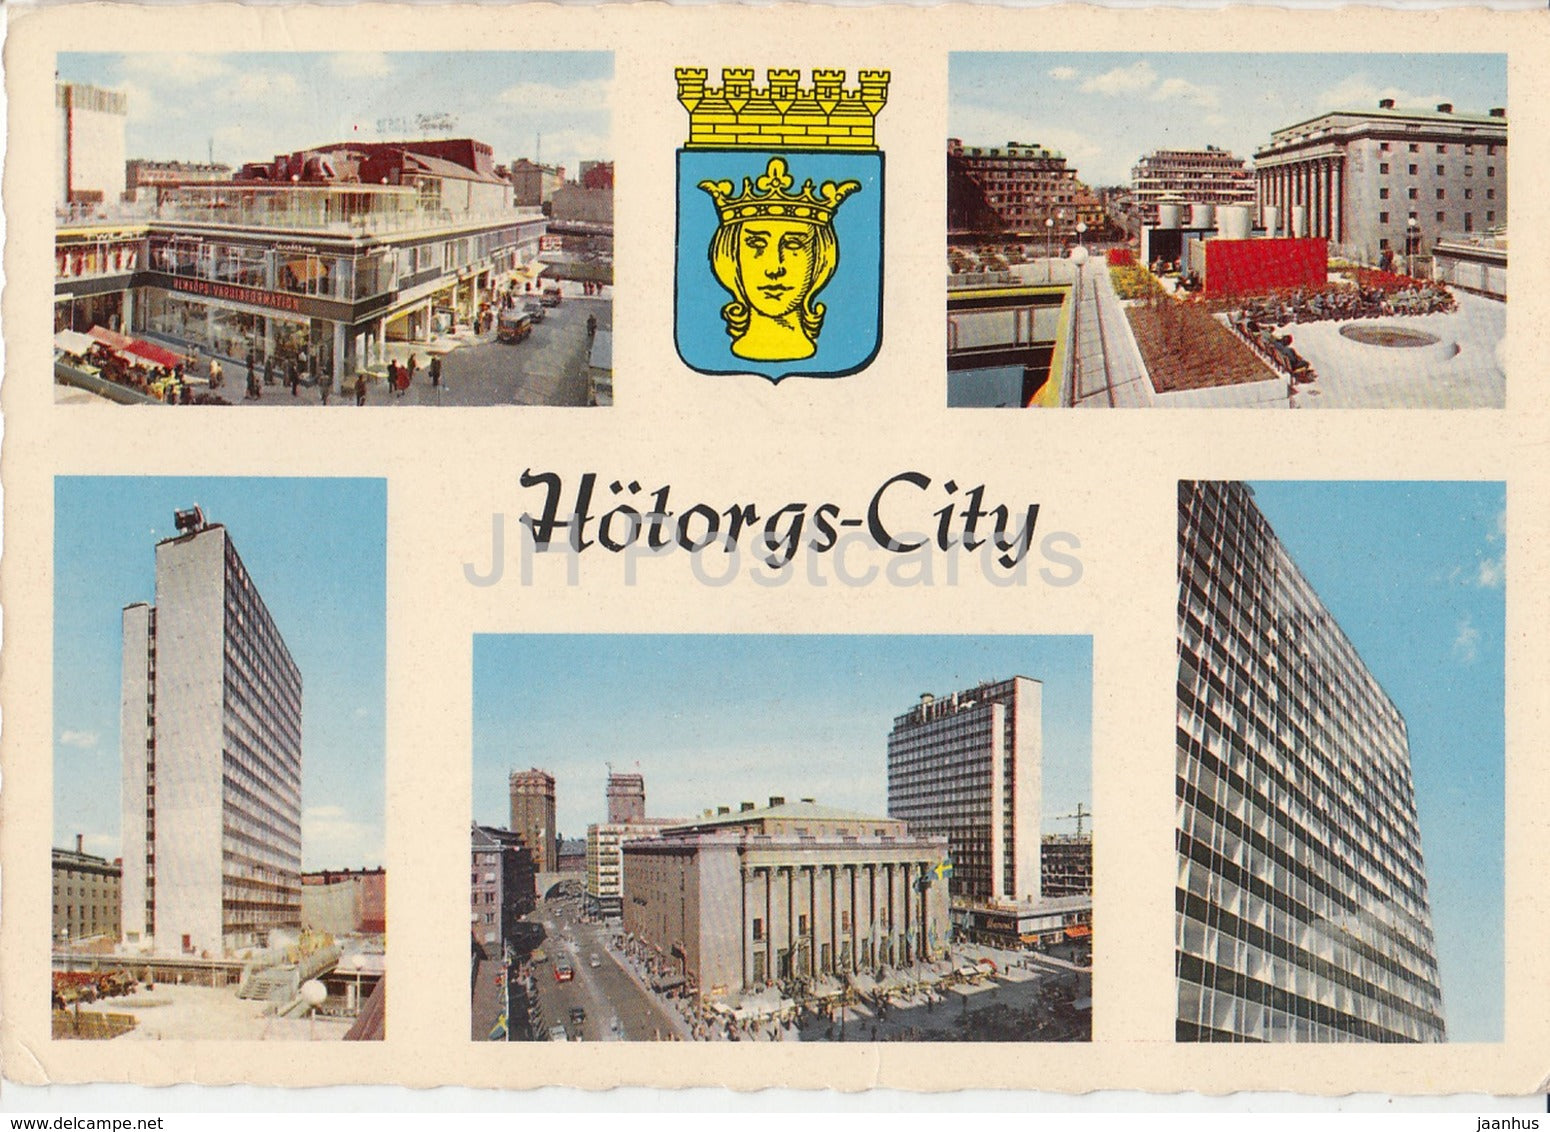 Stockholm - Hotorgs-City - 1959 - Sweden - used - JH Postcards